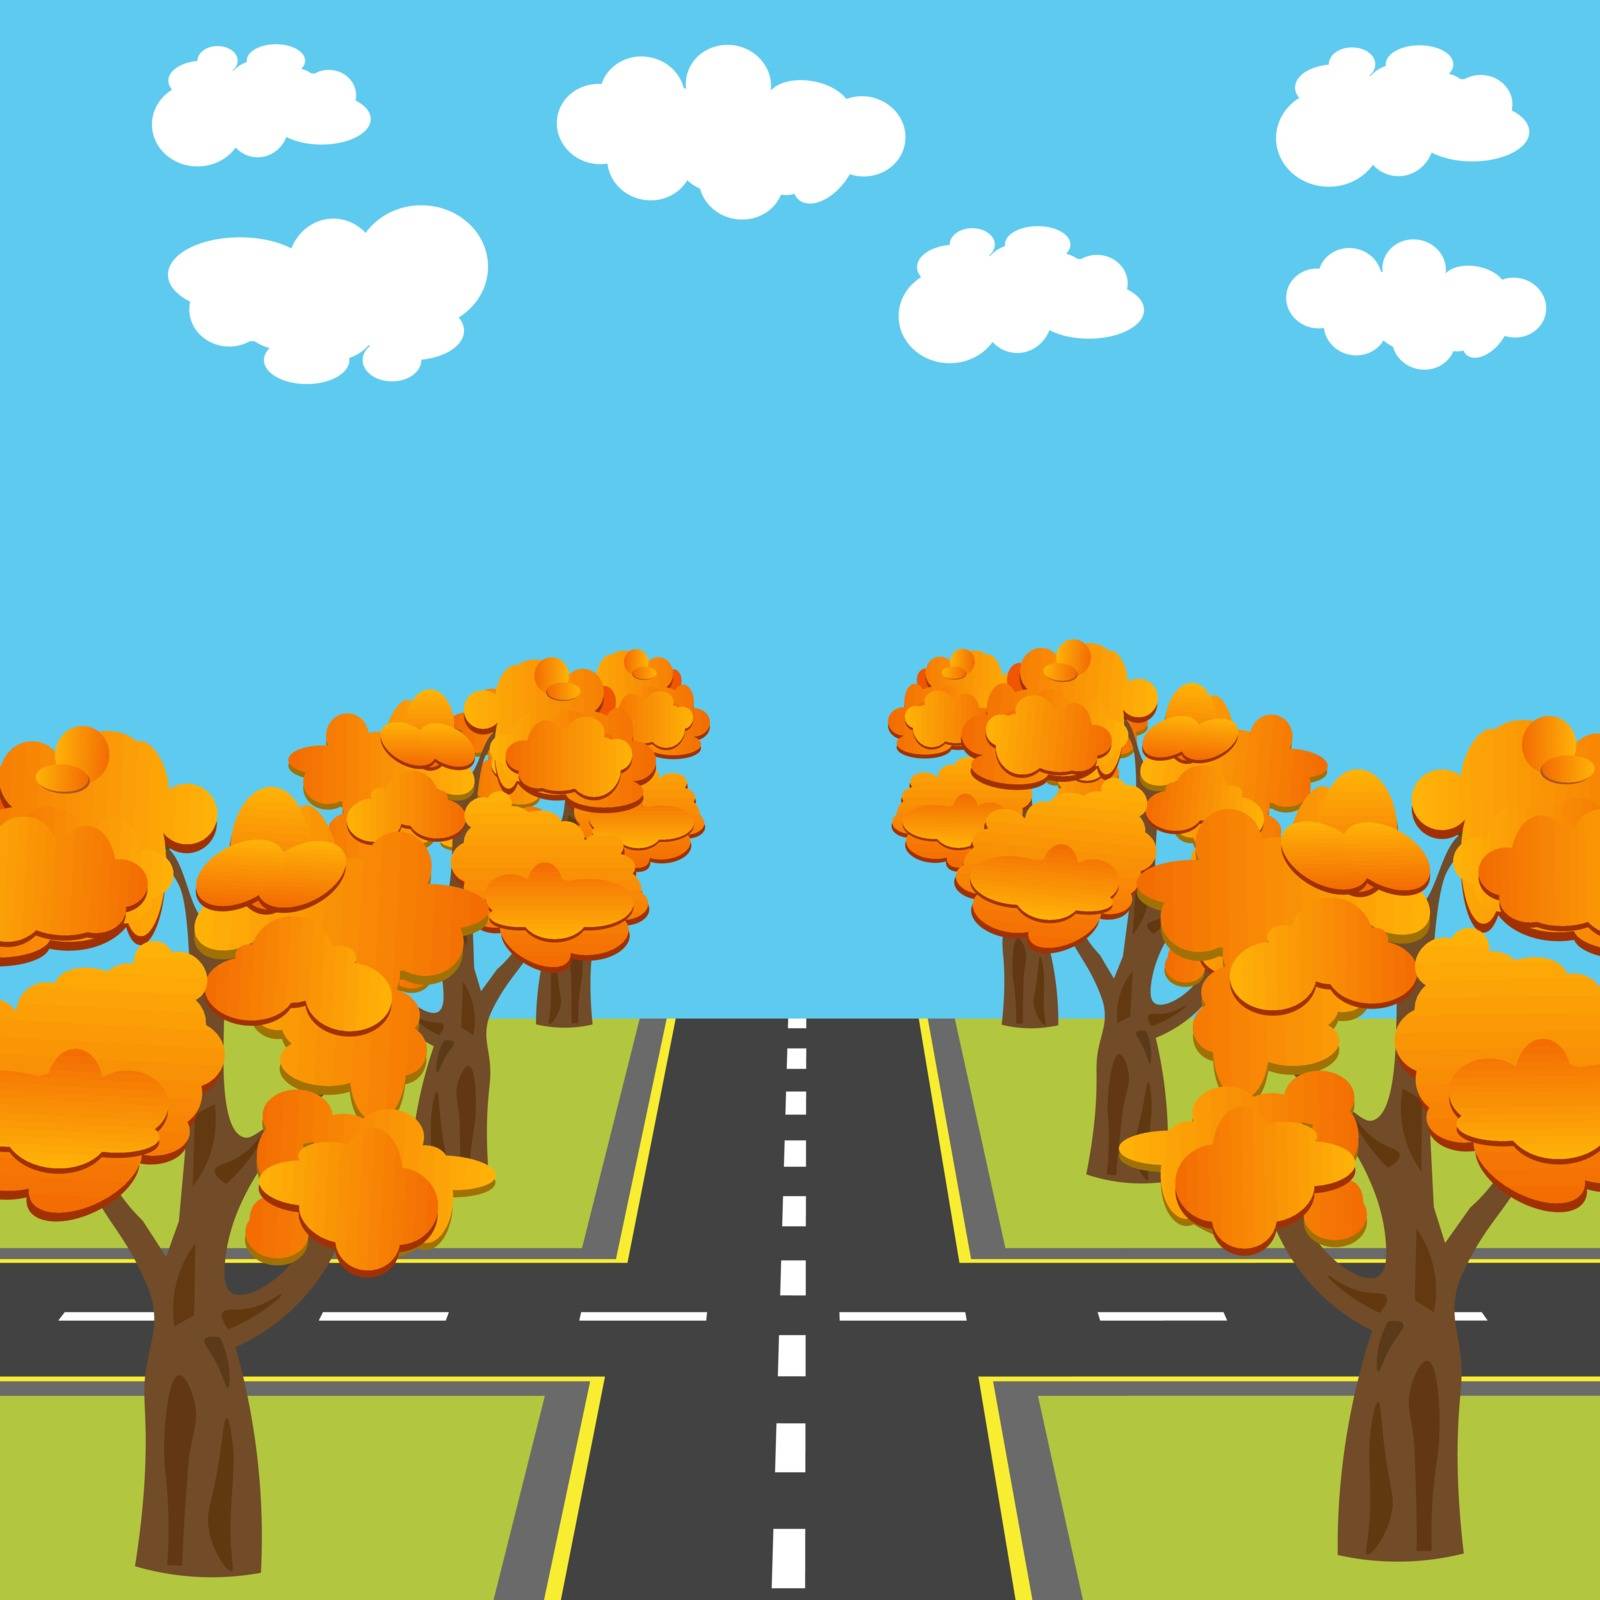 Crossroads equivalent of roads in the future. Alley Autumn oaks illustration by lilystudio